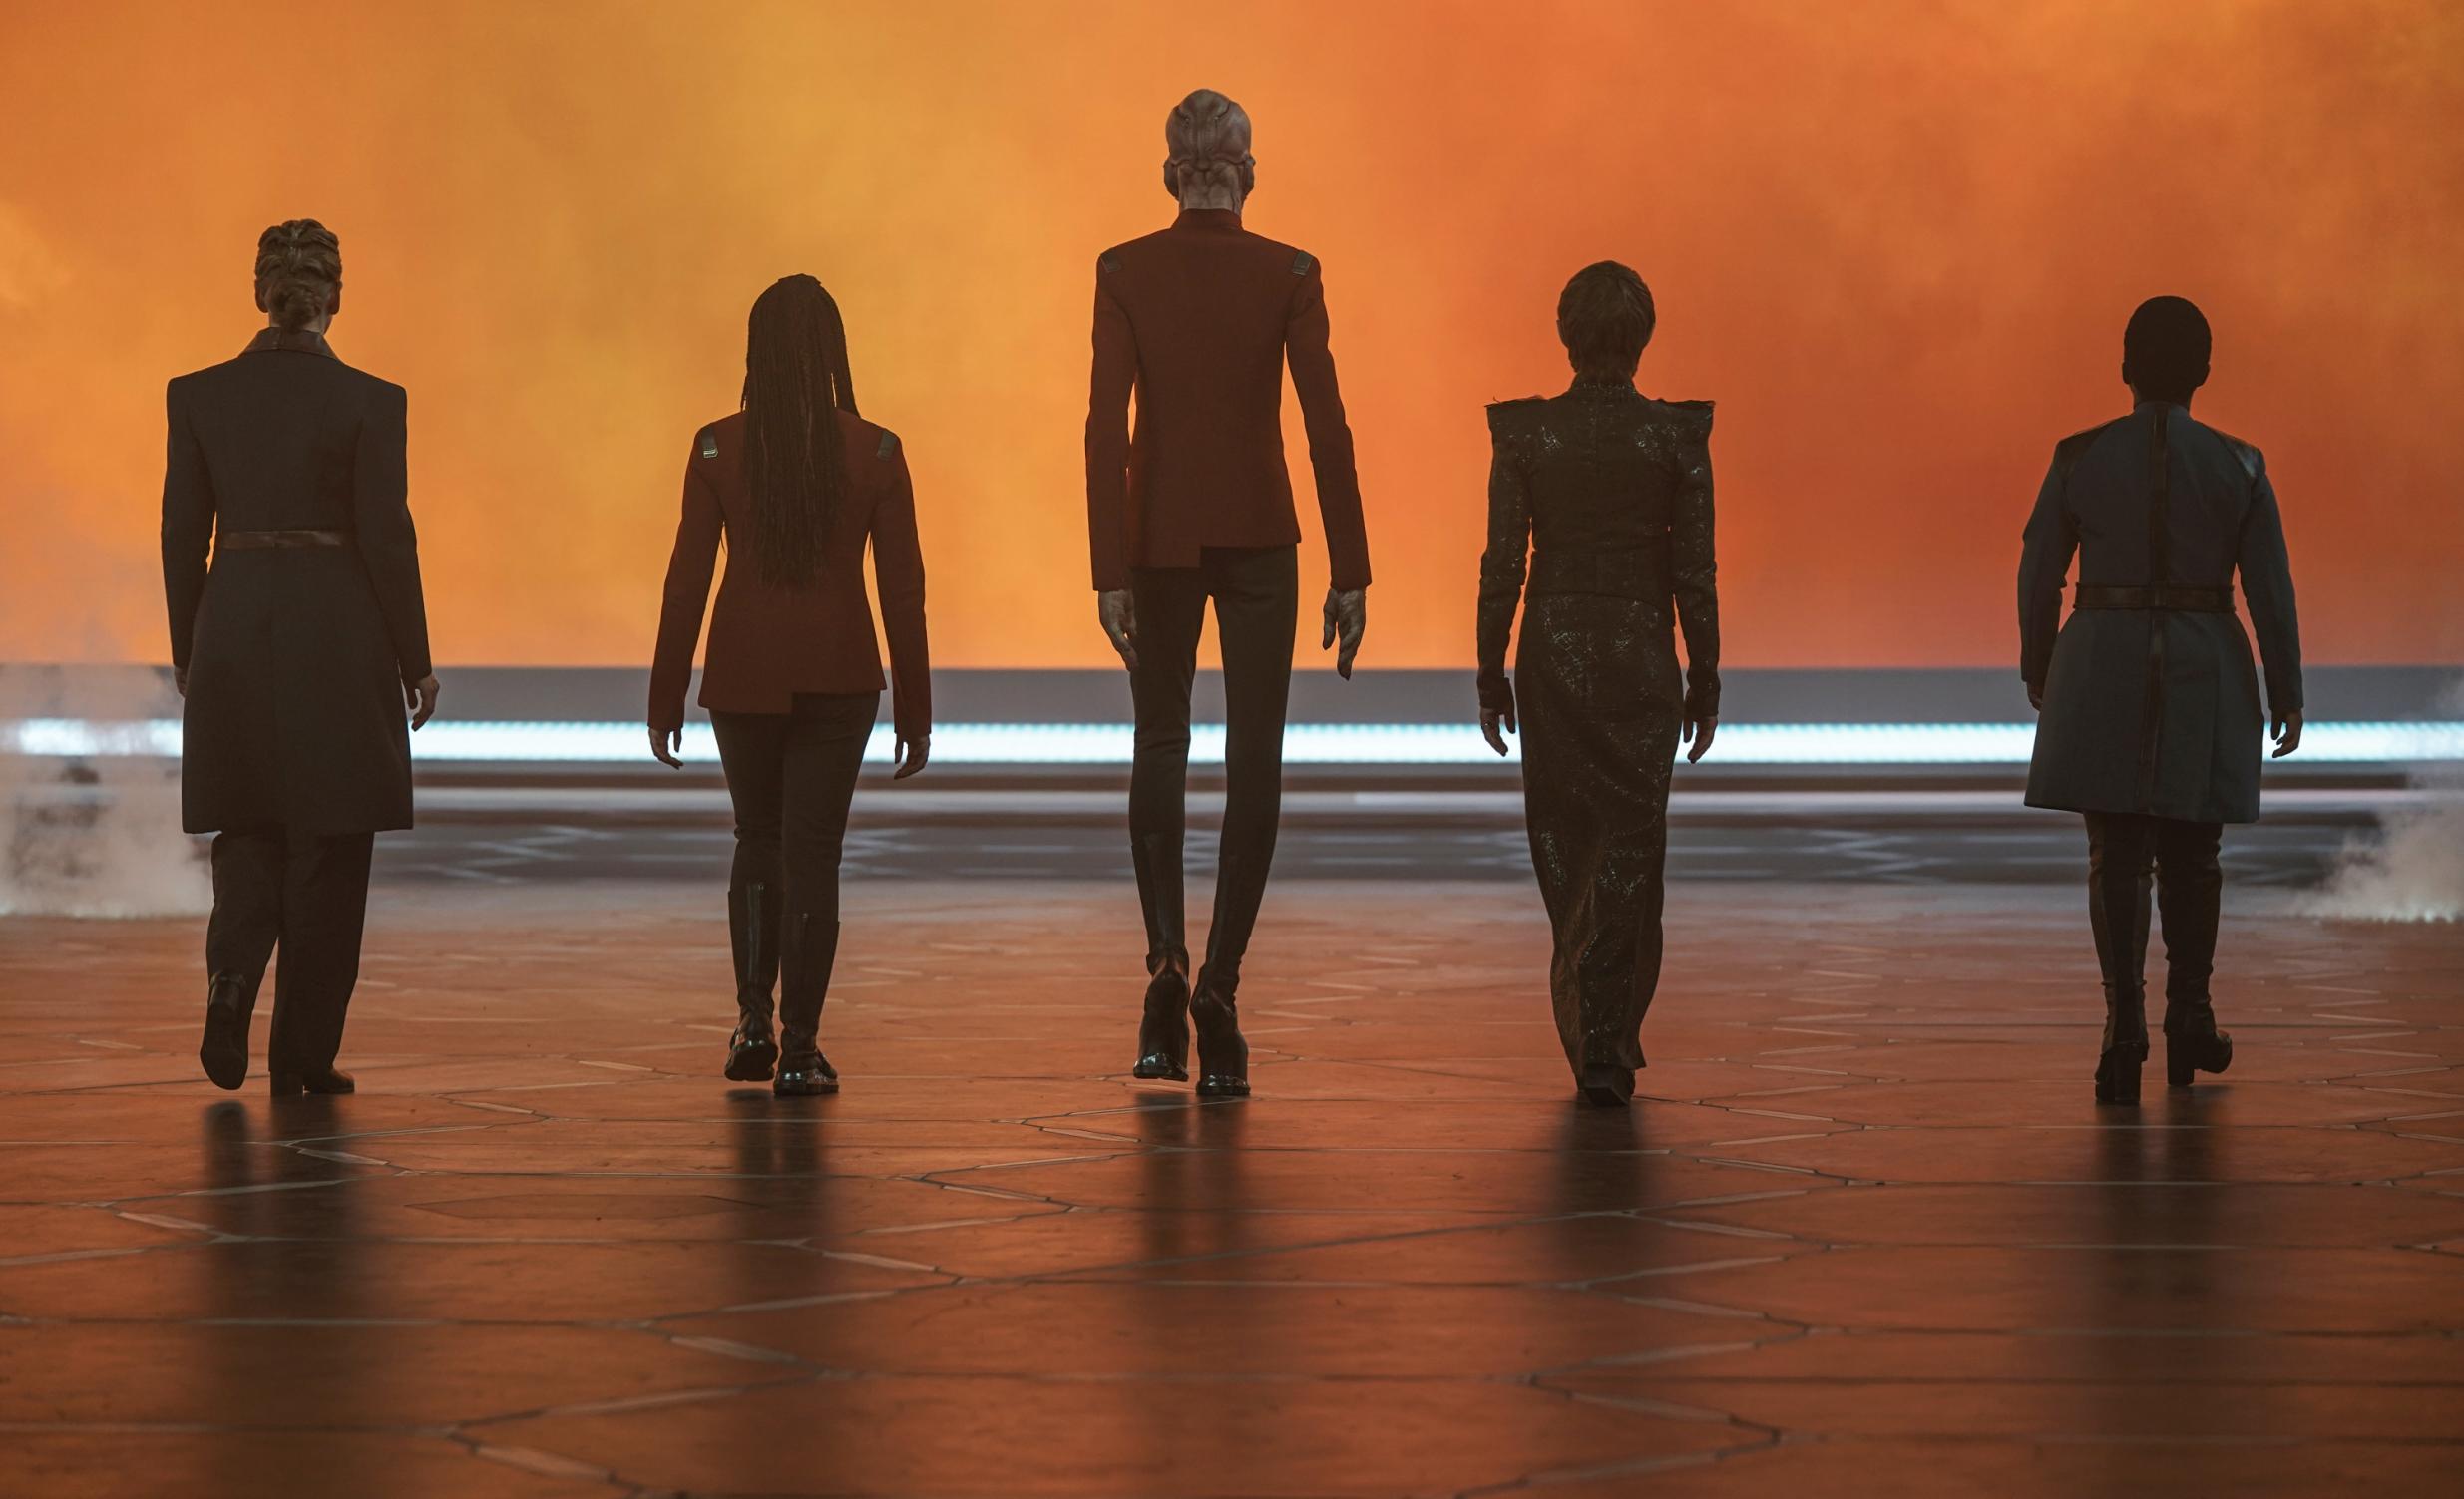 Five Star Trek: Discovery characters walk away into an orange void with their backs to the camera.